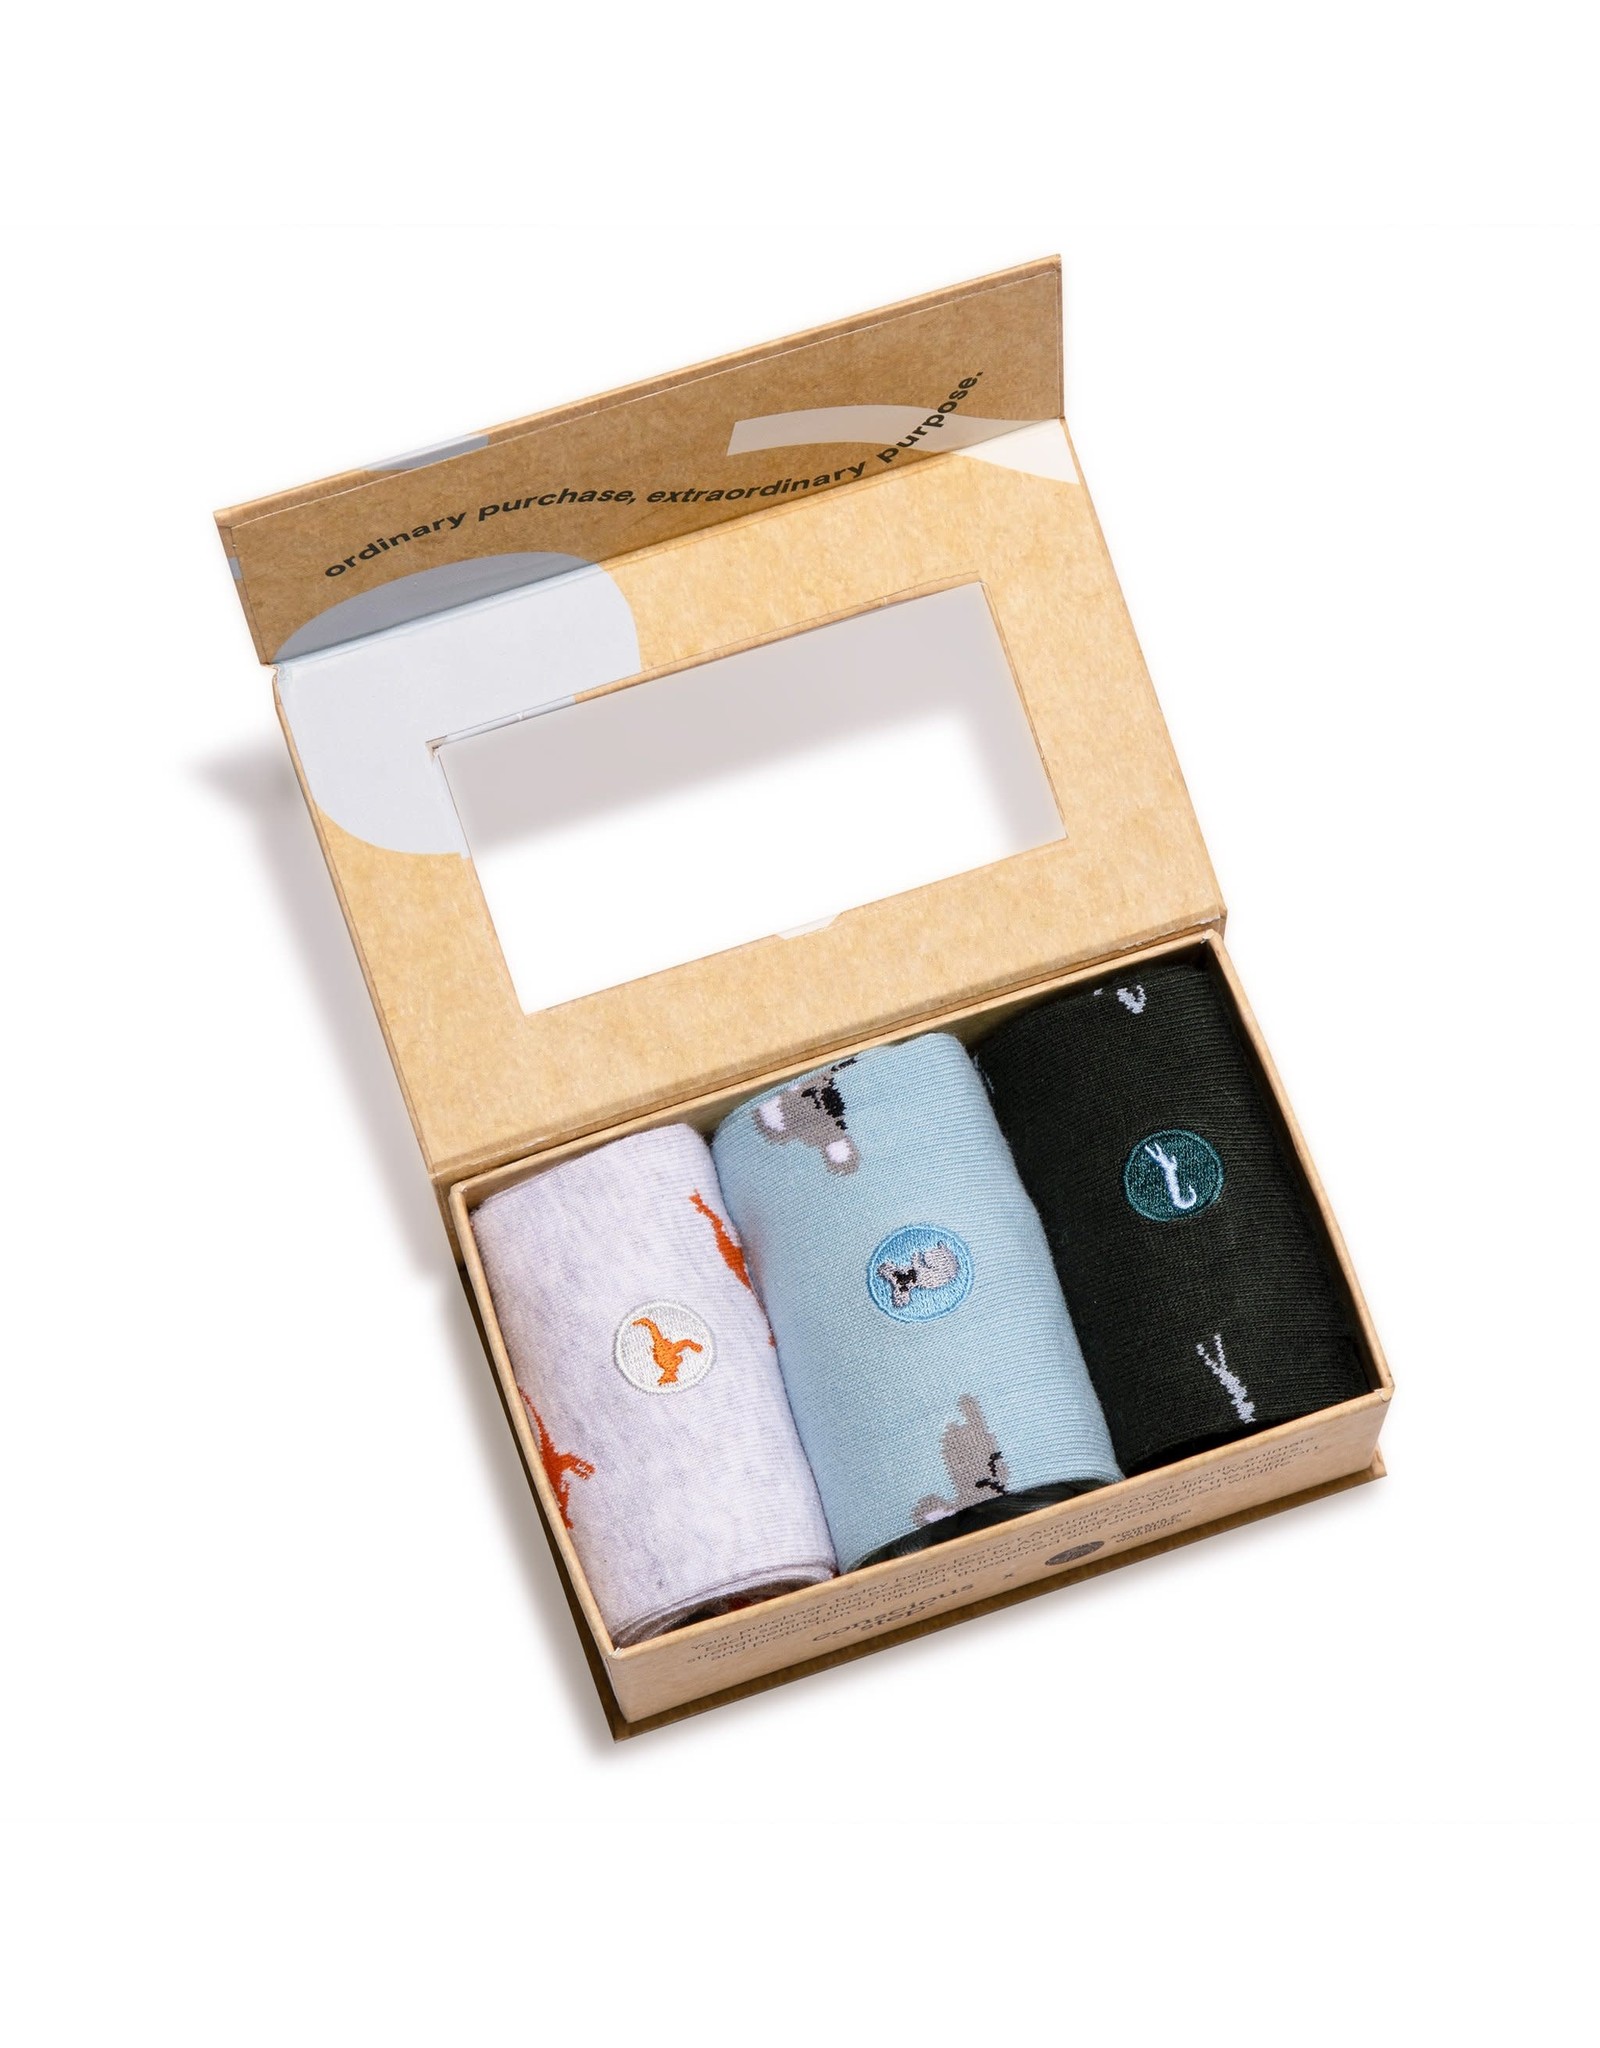 Boxed Set of Socks, Protects Ocean